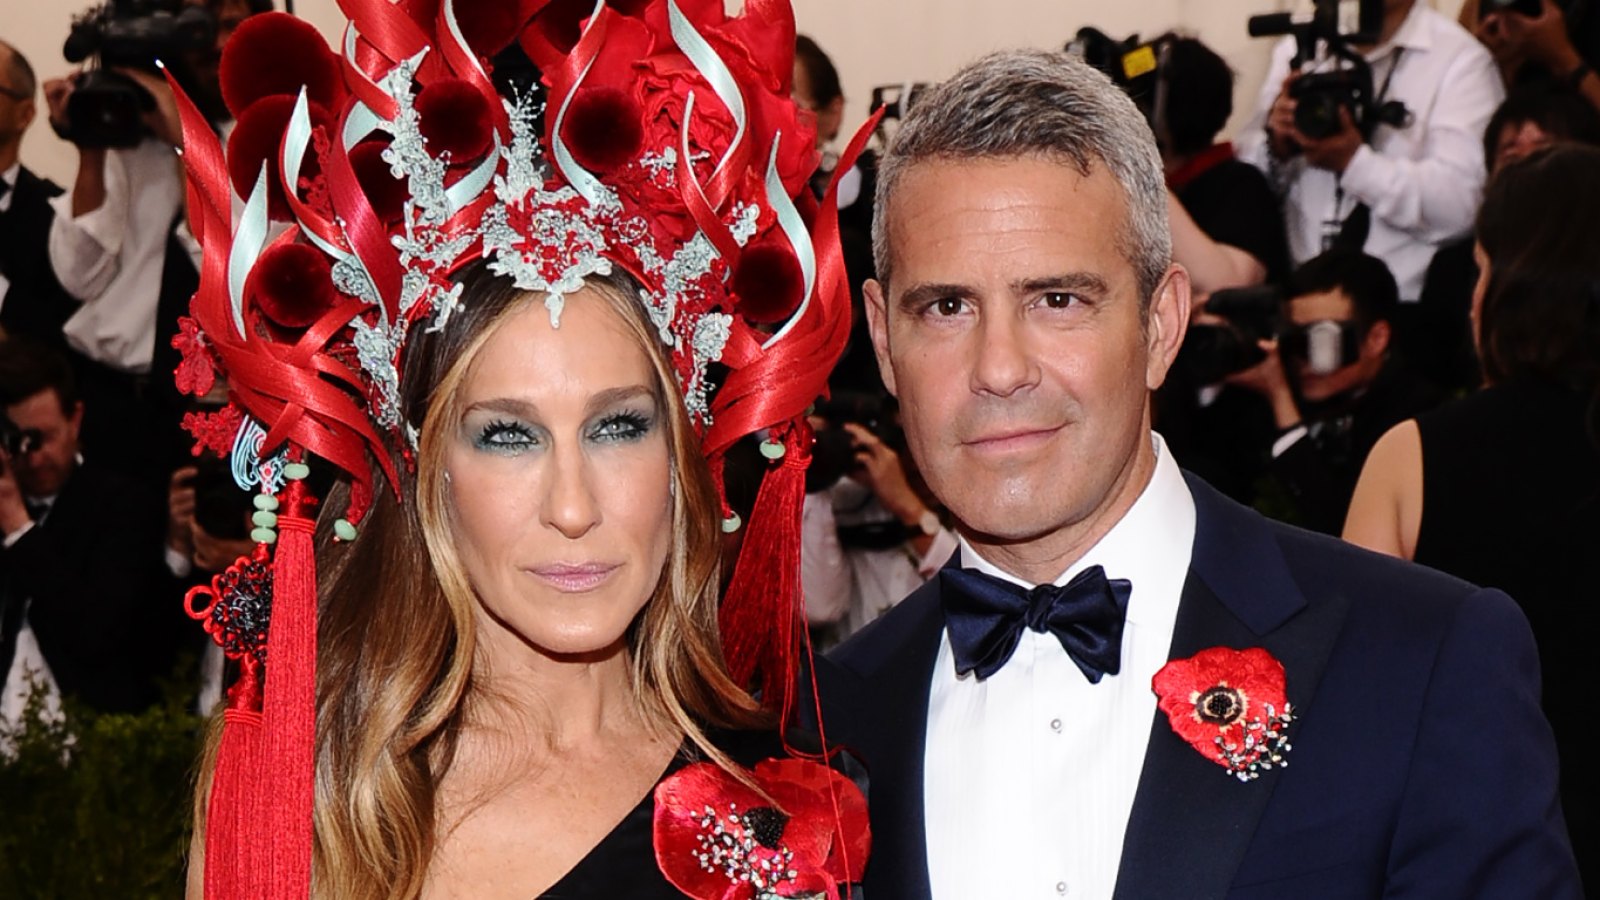 Andy Cohen and ‘Date’ Sarah Jessica Parker Might Be Skipping the 2021 Met Gala — Here’s Why